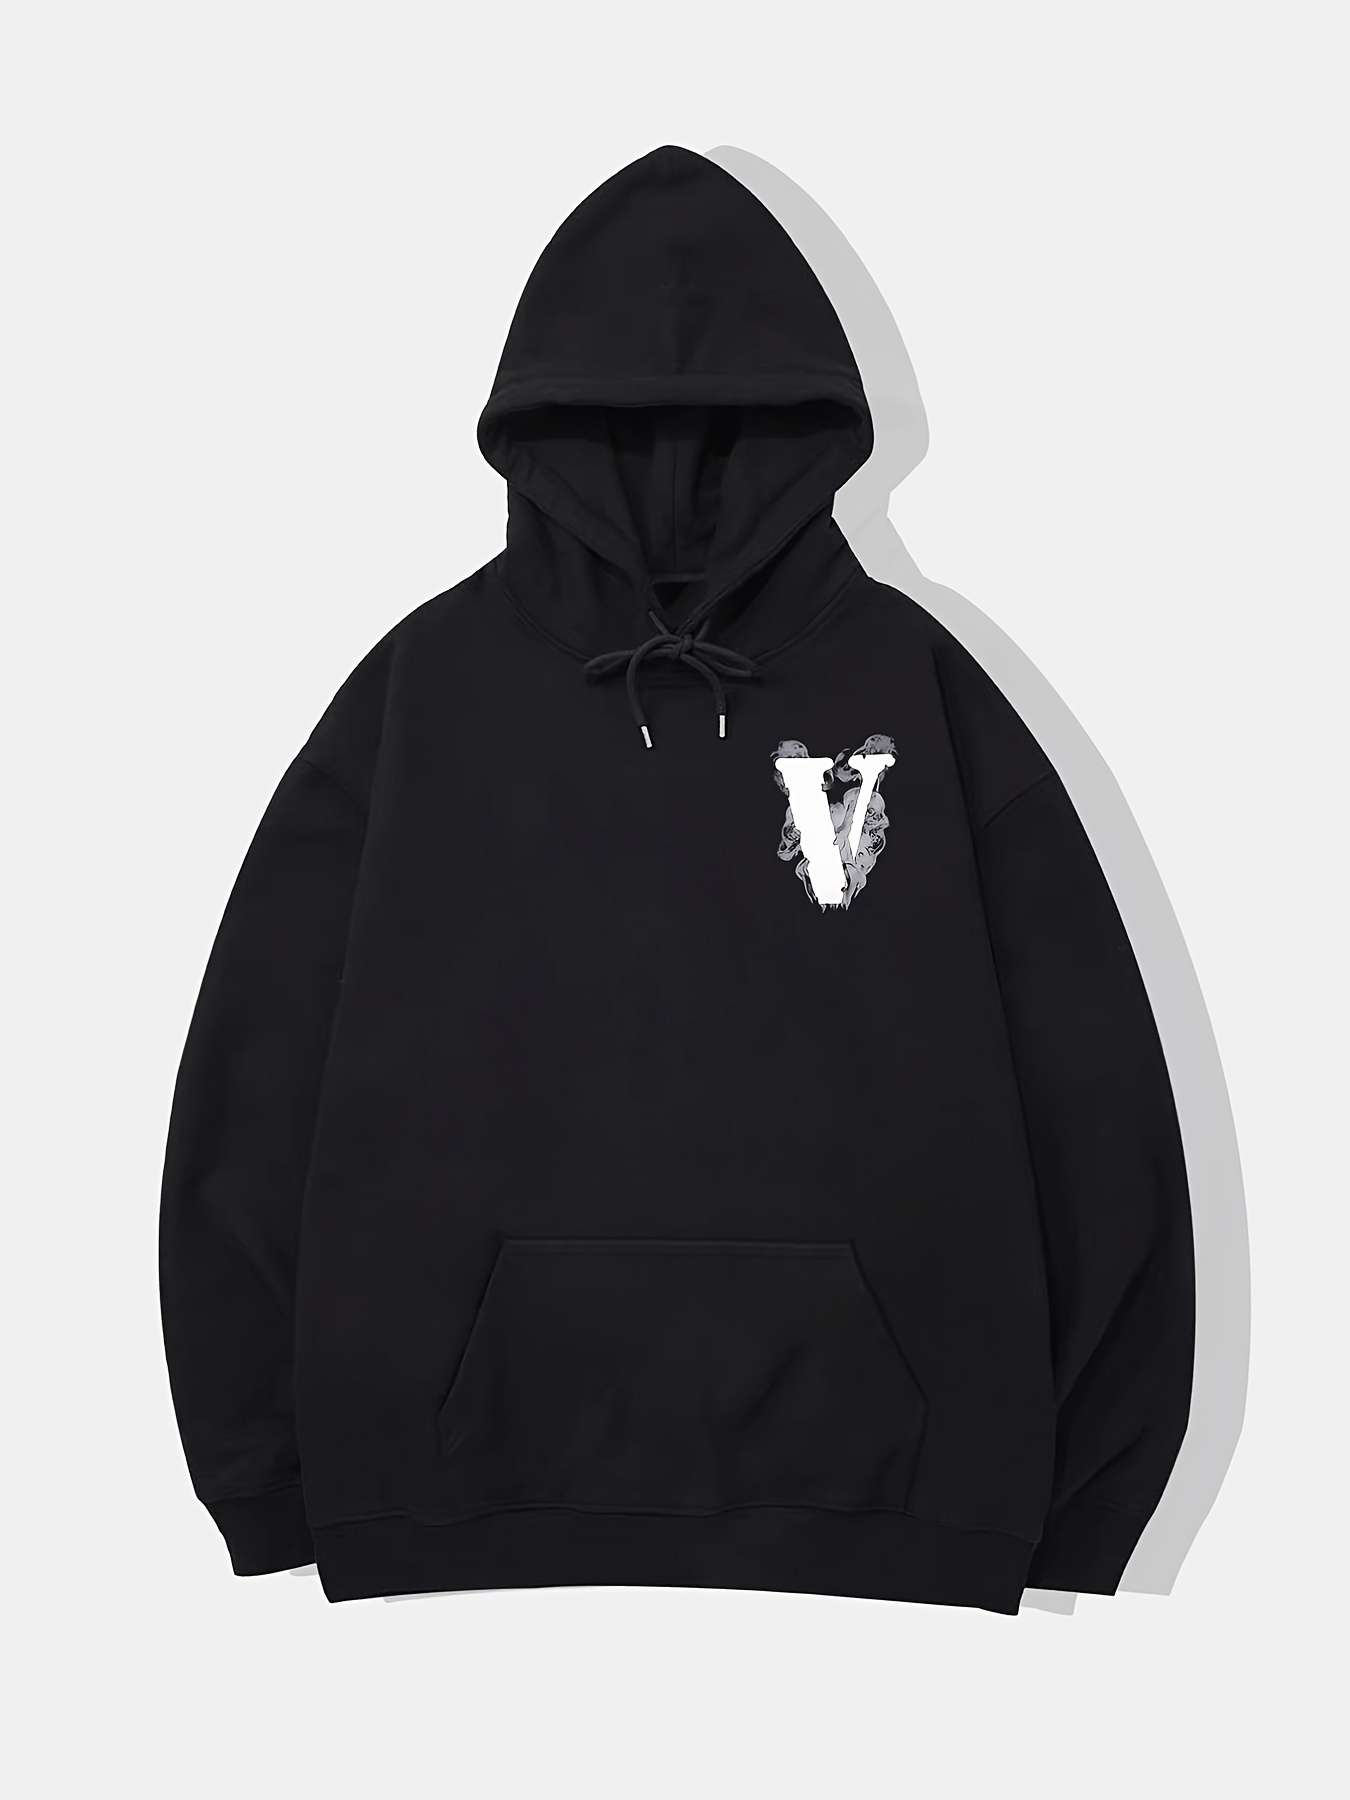 Big Letter V Print, Men's Outfits, Casual Hoodies Long Sleeve